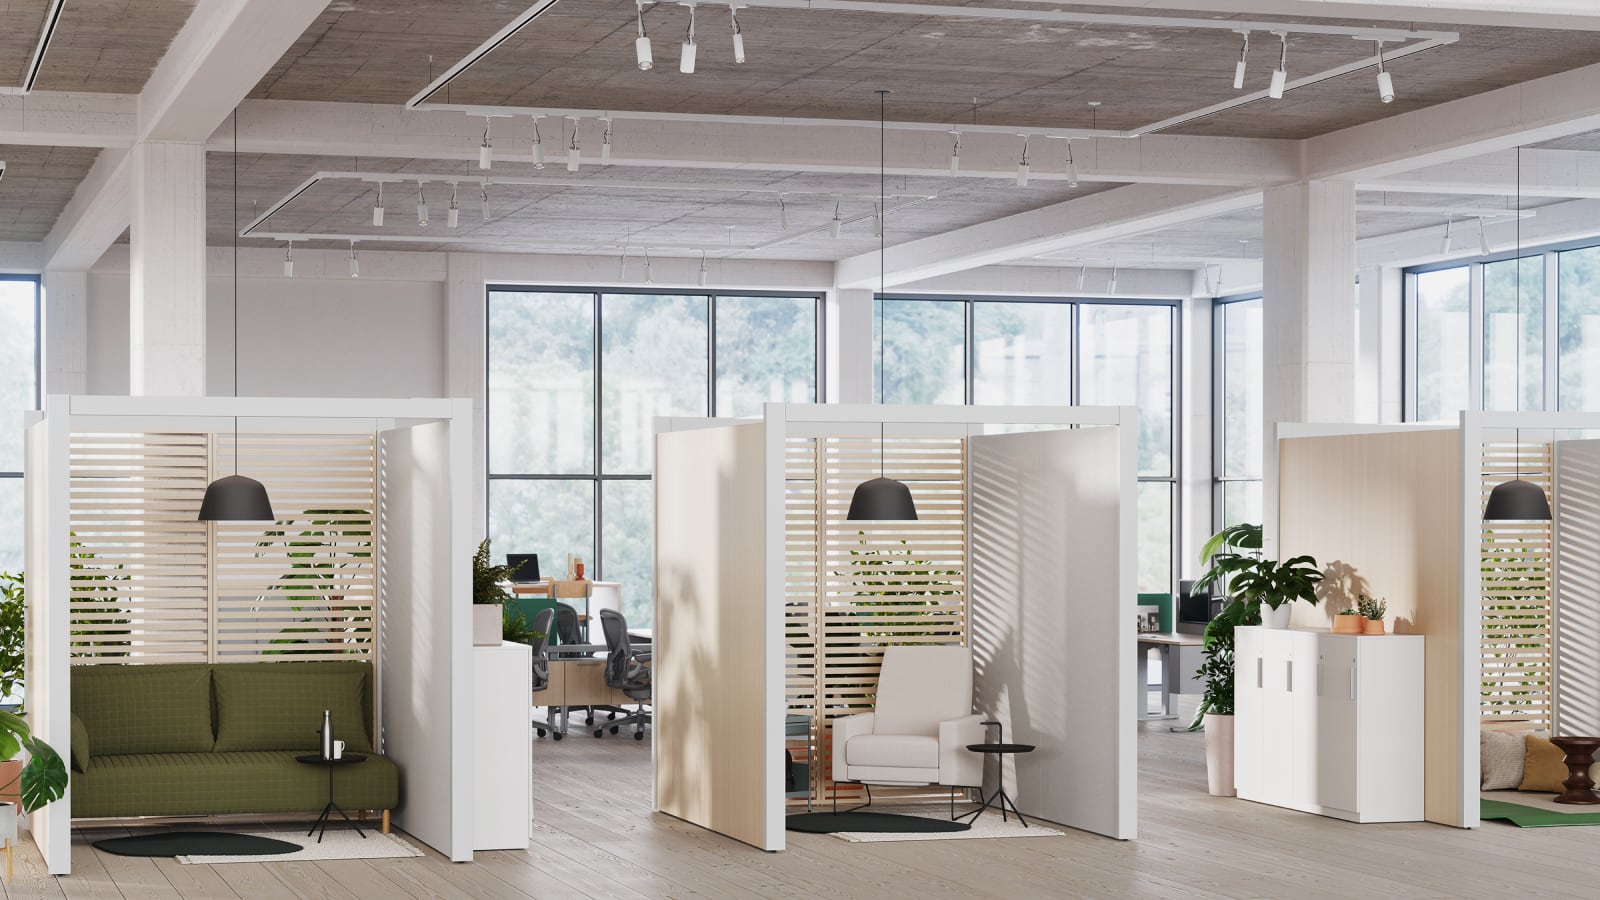 A grouping of three one-person work settings designed as calming spaces devoid of technology with the goal of providing employees a moment of rest for both body and mind, resulting in higher overall productivity.